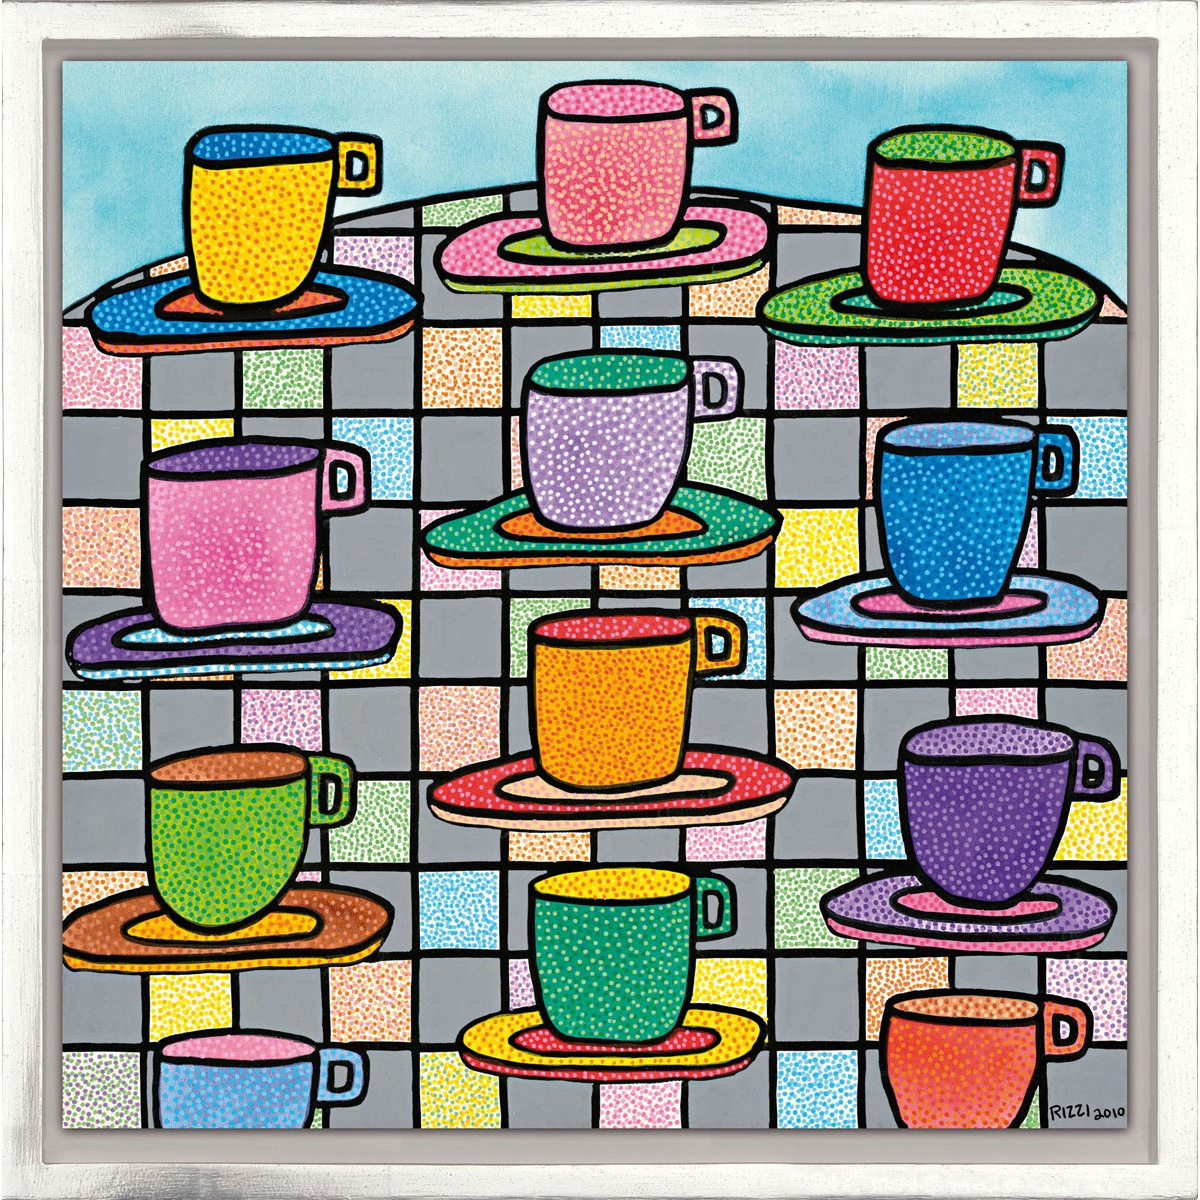 The most colorful cups of coffee